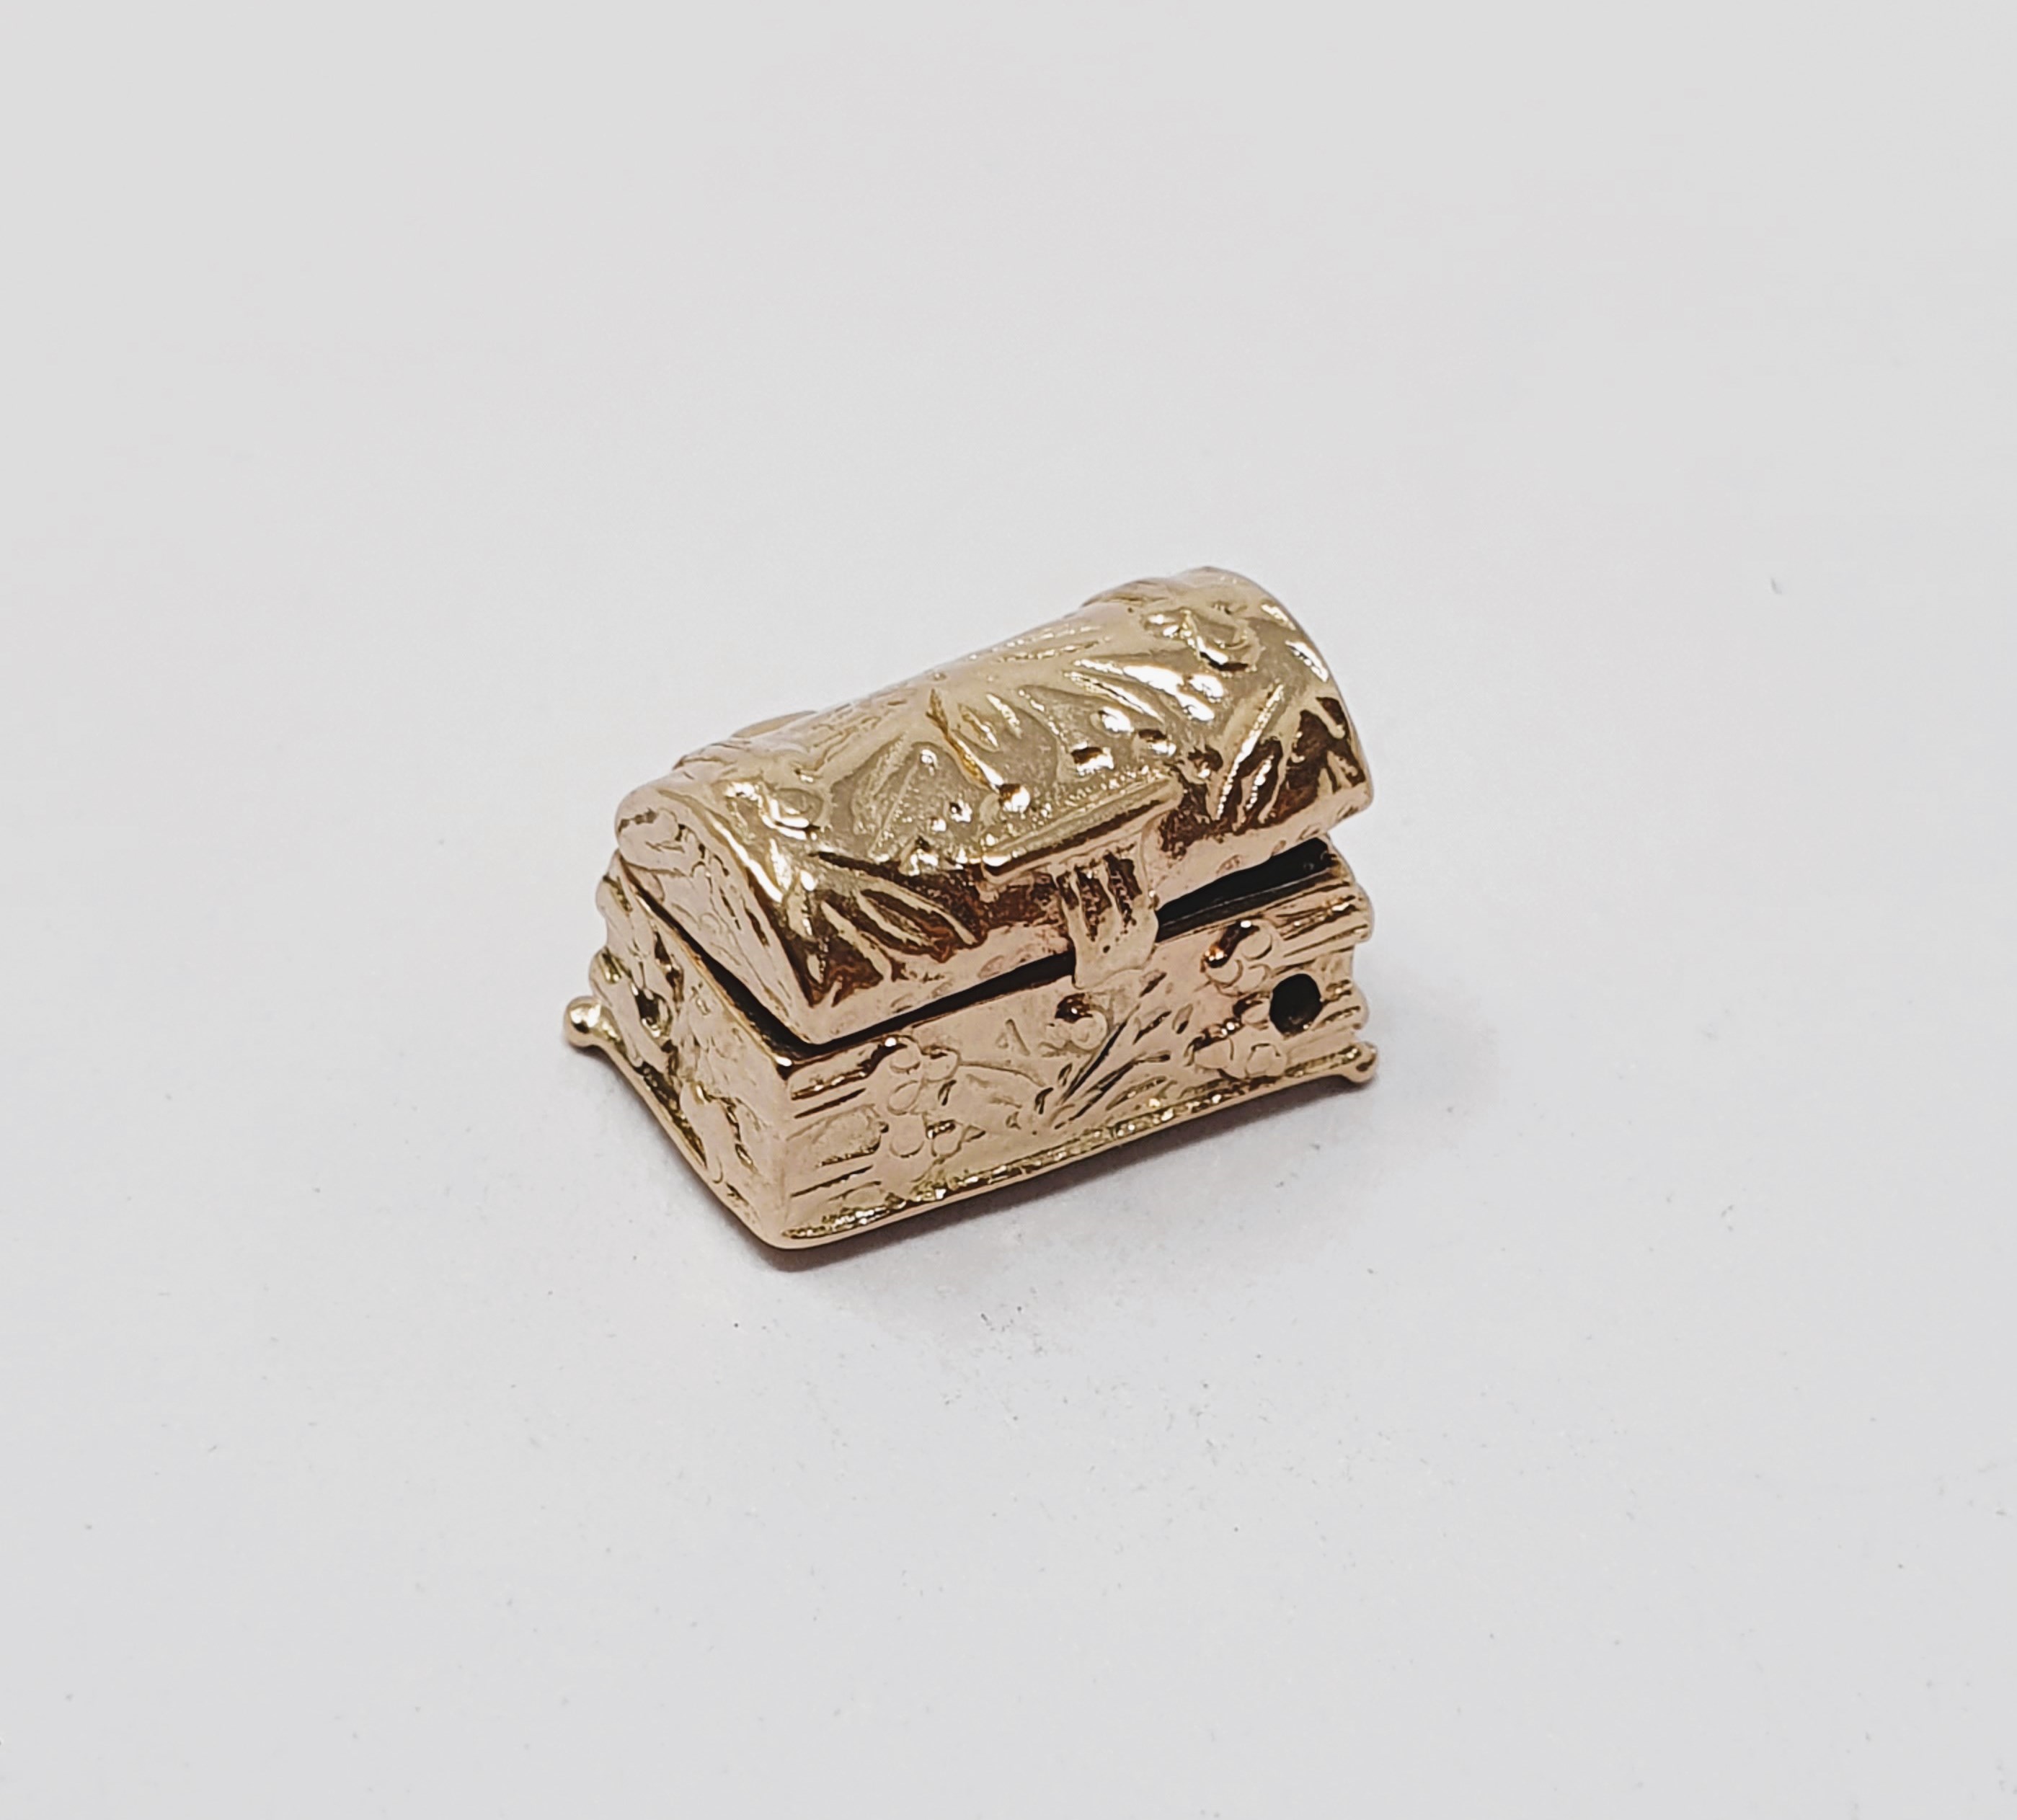 9ct gold vintage treasure chest charm, gross weight 3.